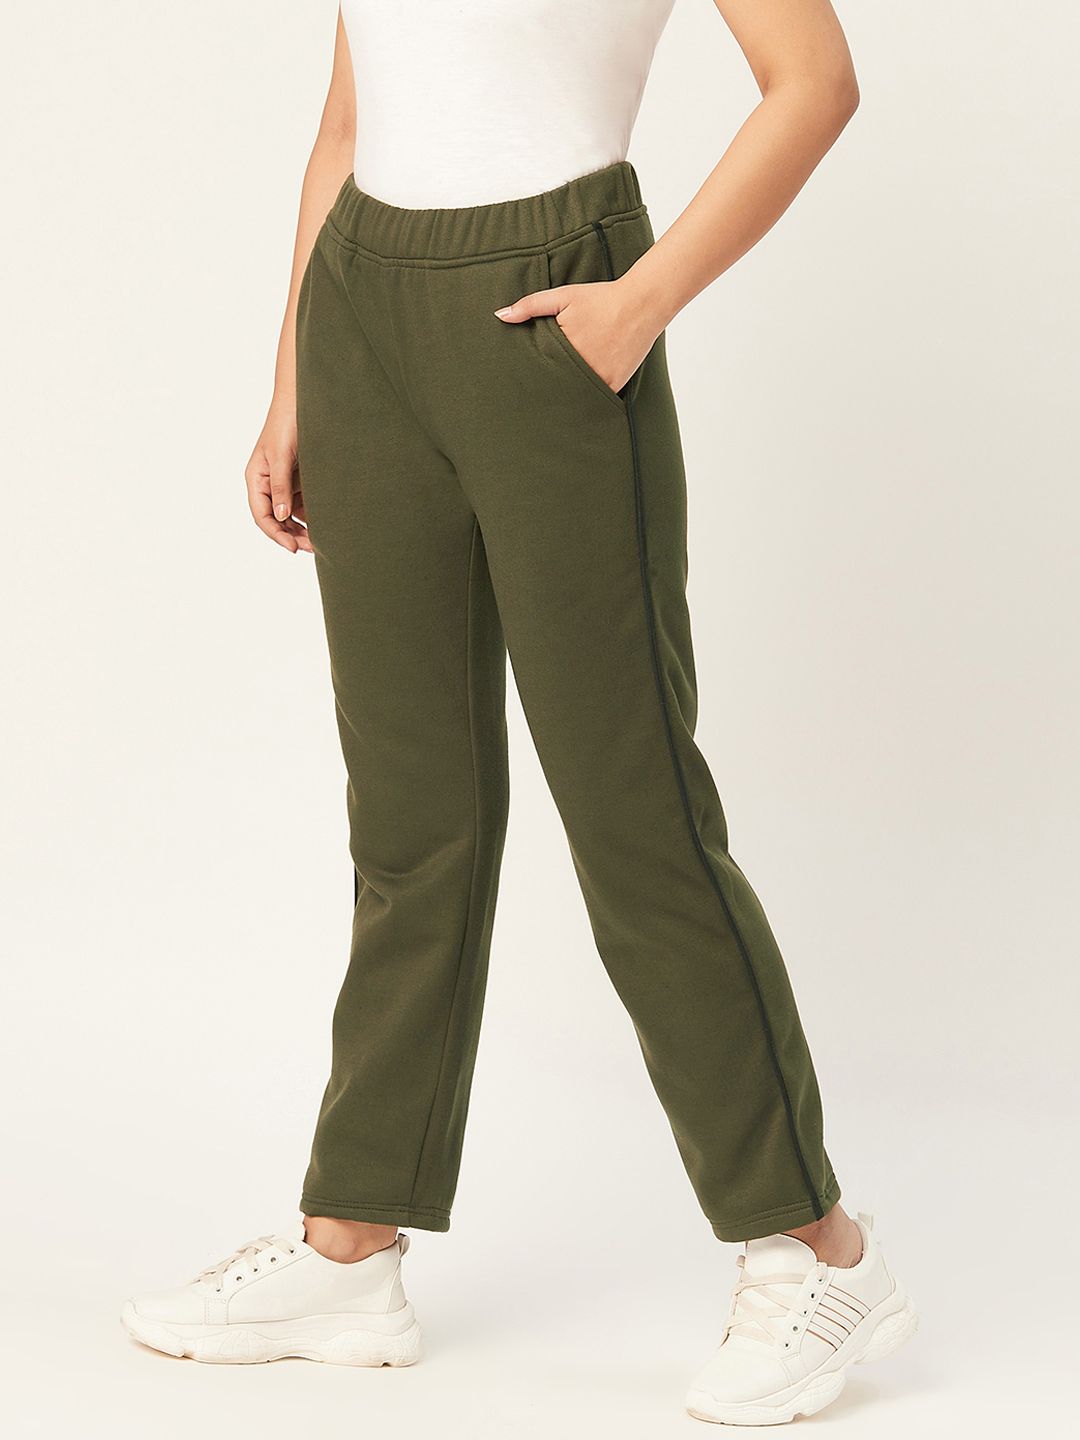 Alsace Lorraine Paris Women Olive Green Solid Track Pants Price in India